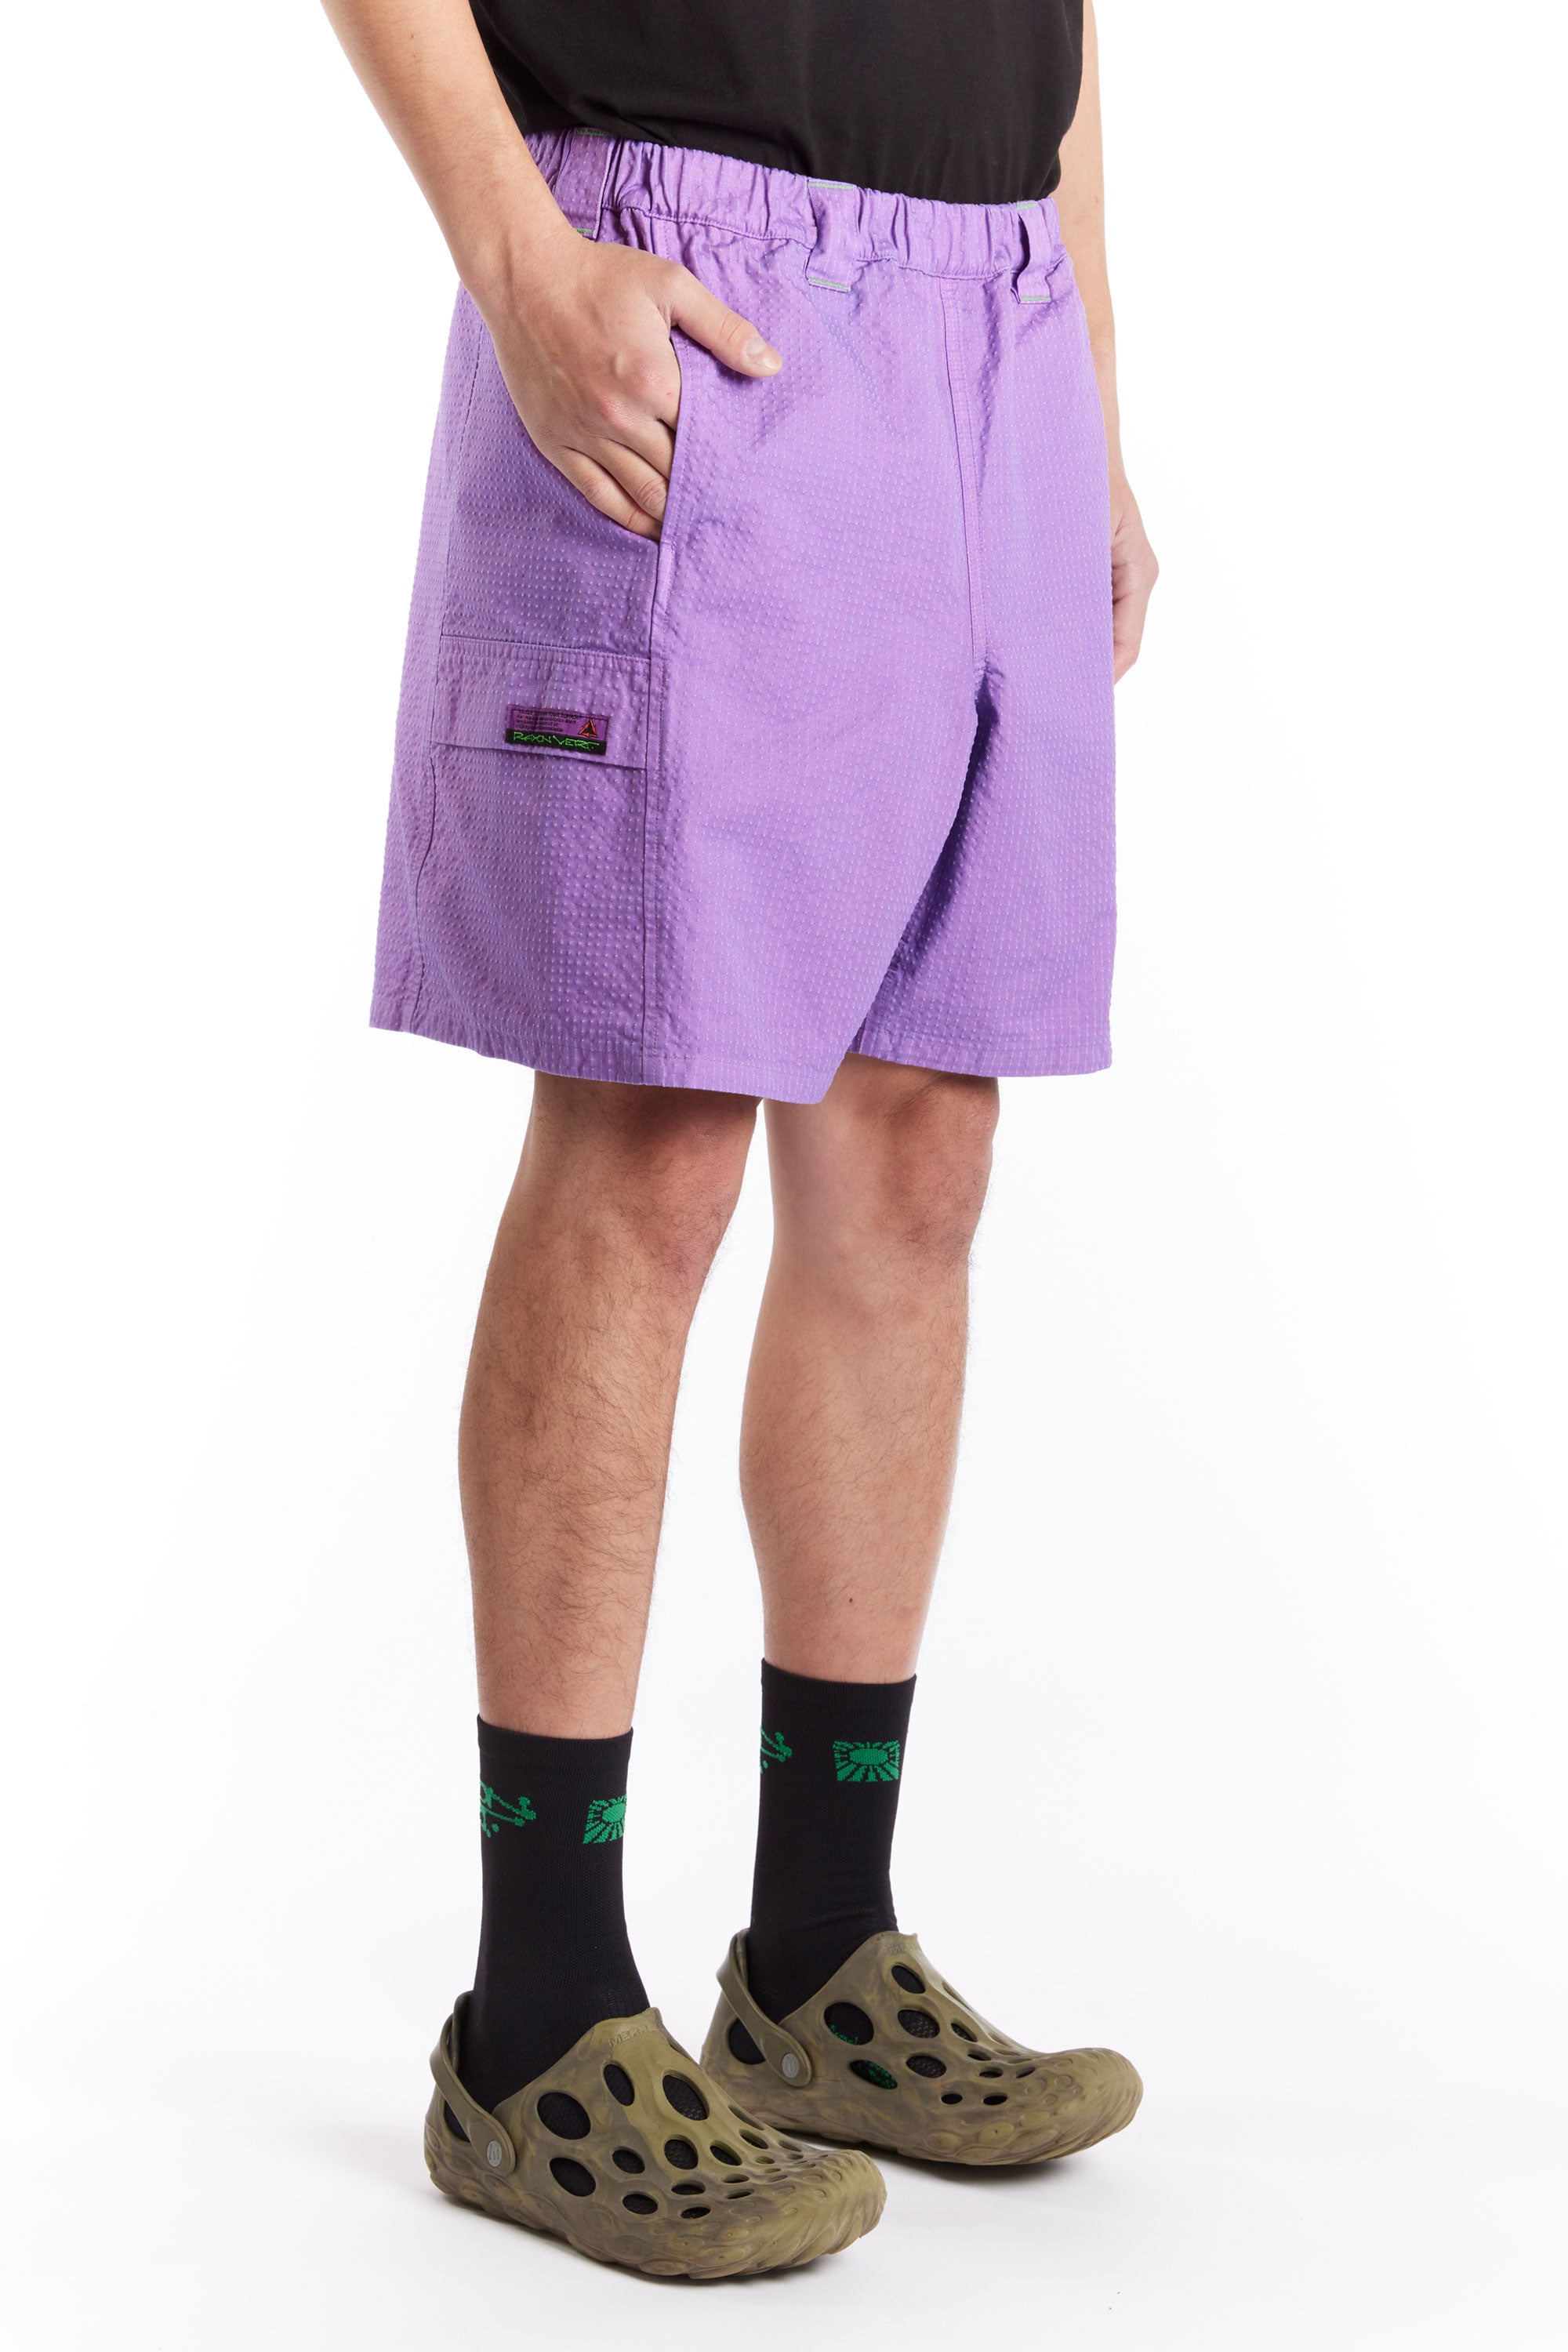 The RAYON VERT - FURIO SHORTS COBRA PURPLE available online with global shipping, and in PAM Stores Melbourne and Sydney.